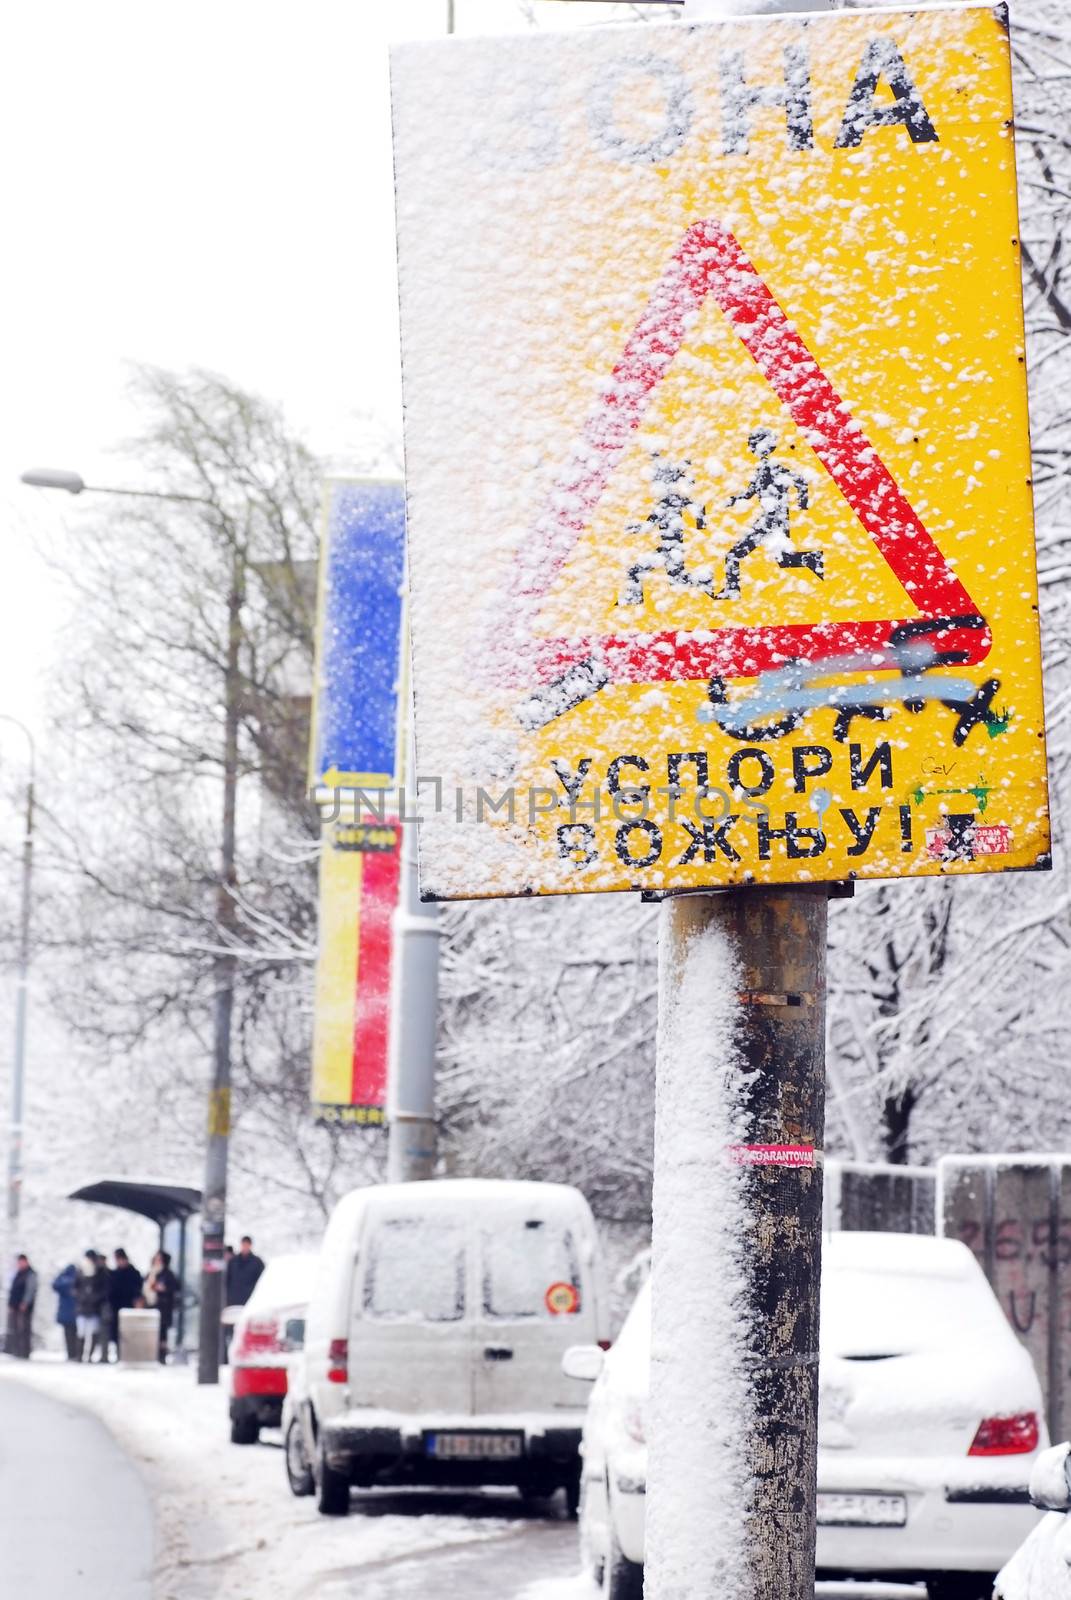 serbian traffic warning sign slow down, parked cars and bus station with people, at snow on street in Belgrade